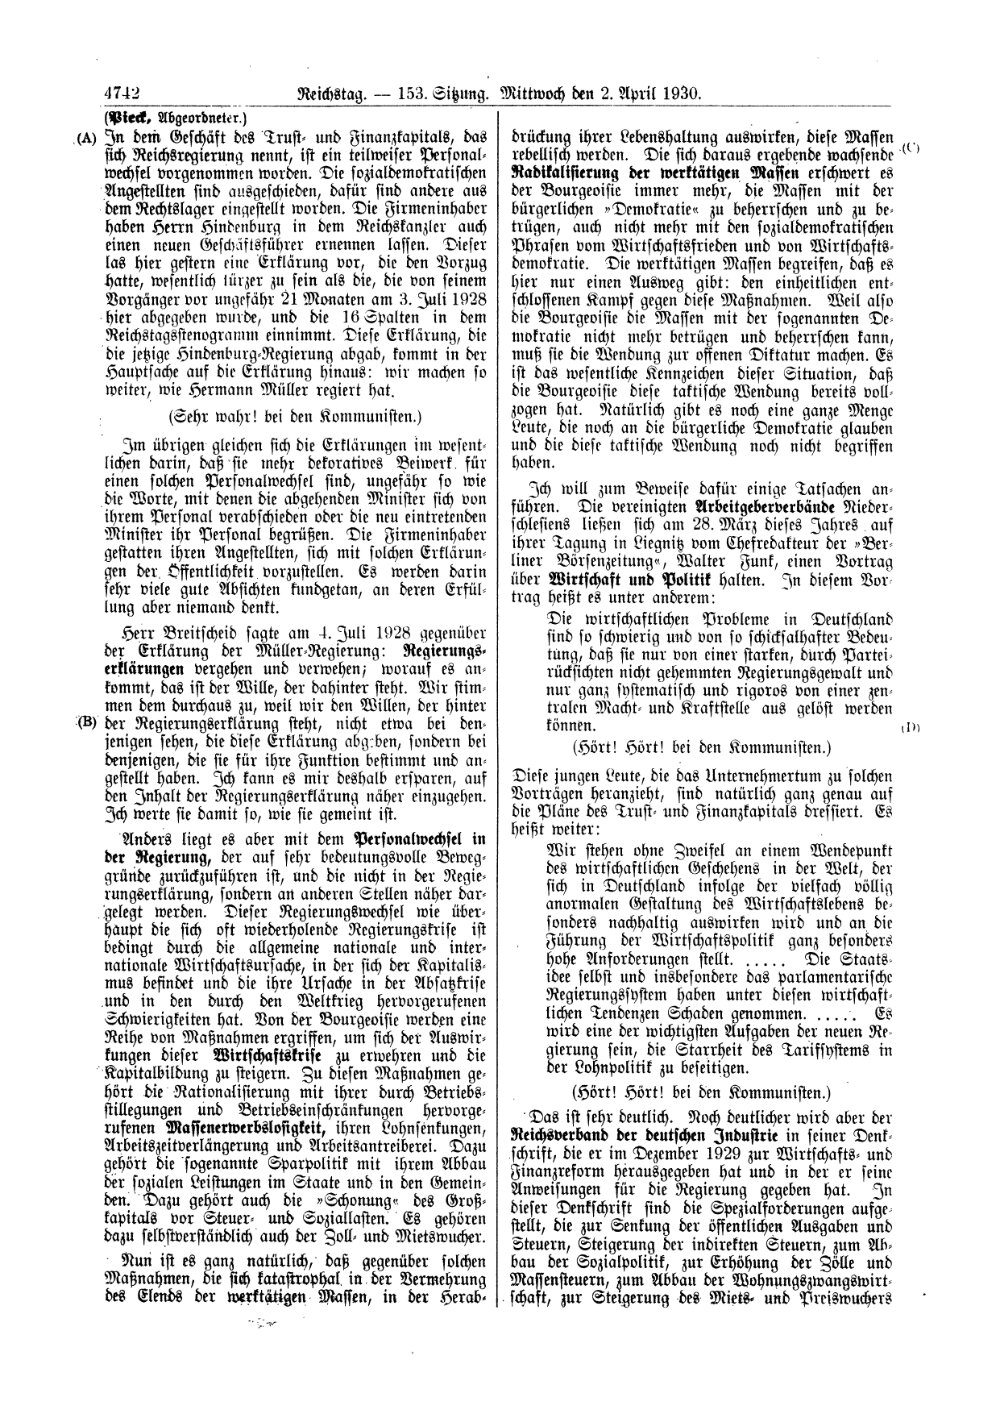 Scan of page 4742